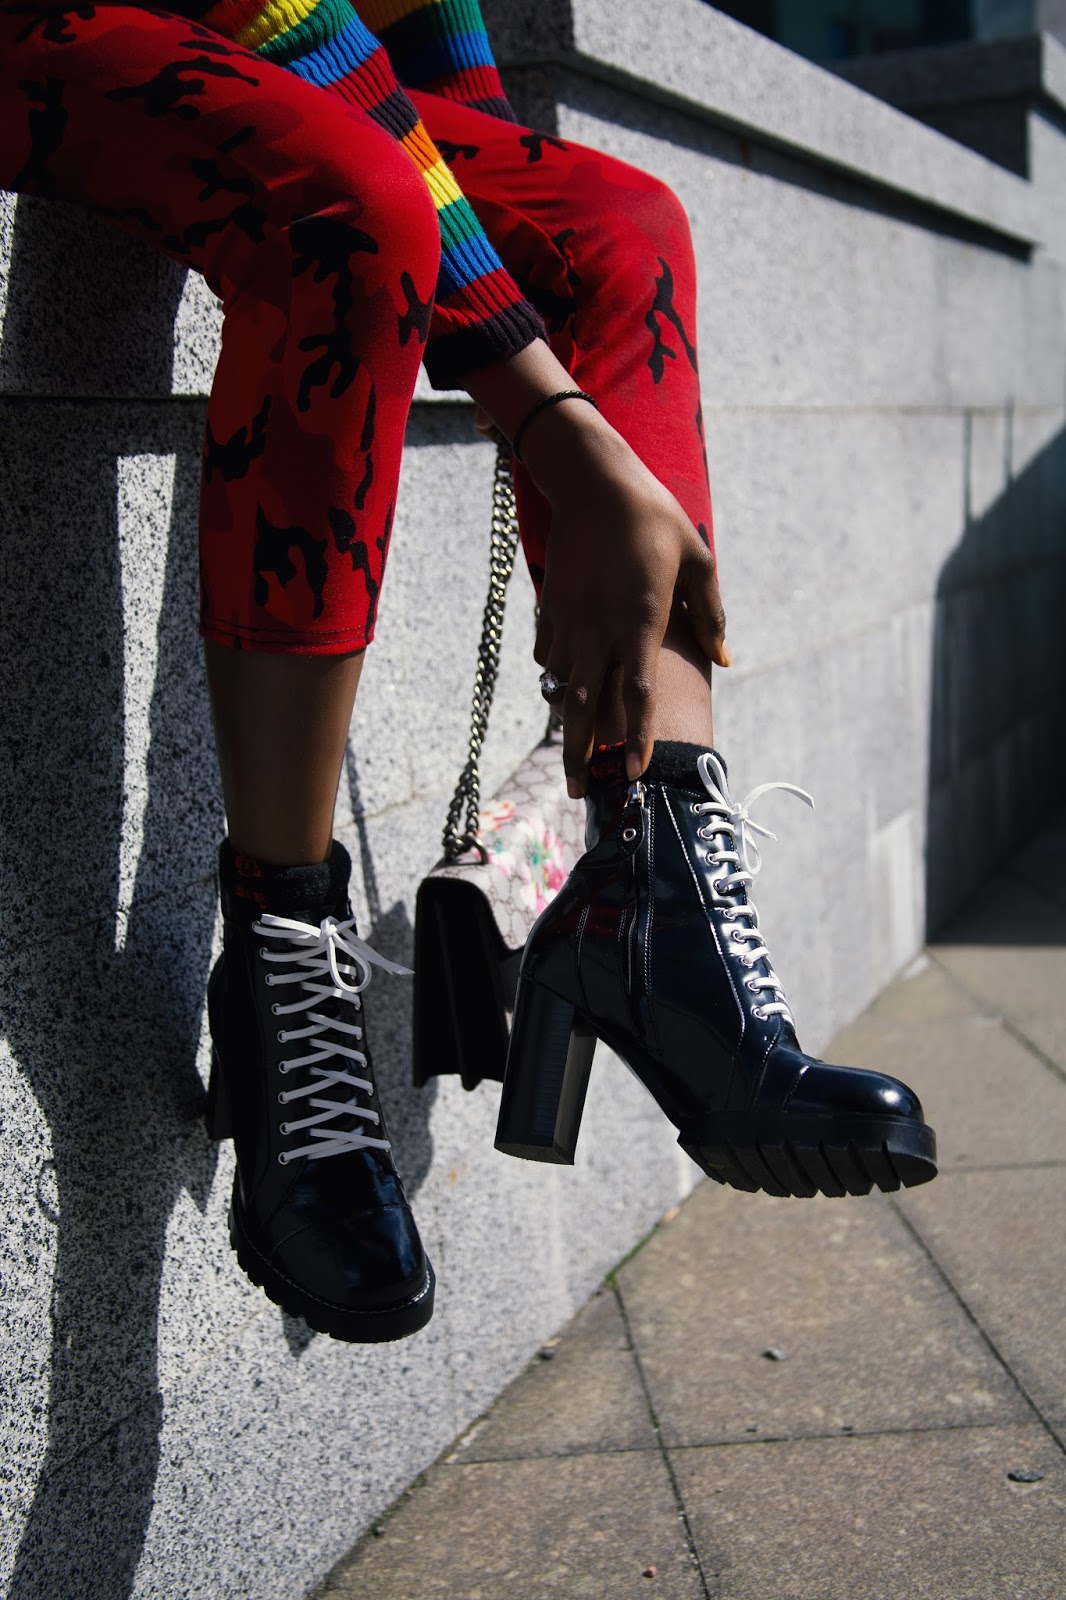 Melody Jacob: Louis Vuitton star trail ankle boots.